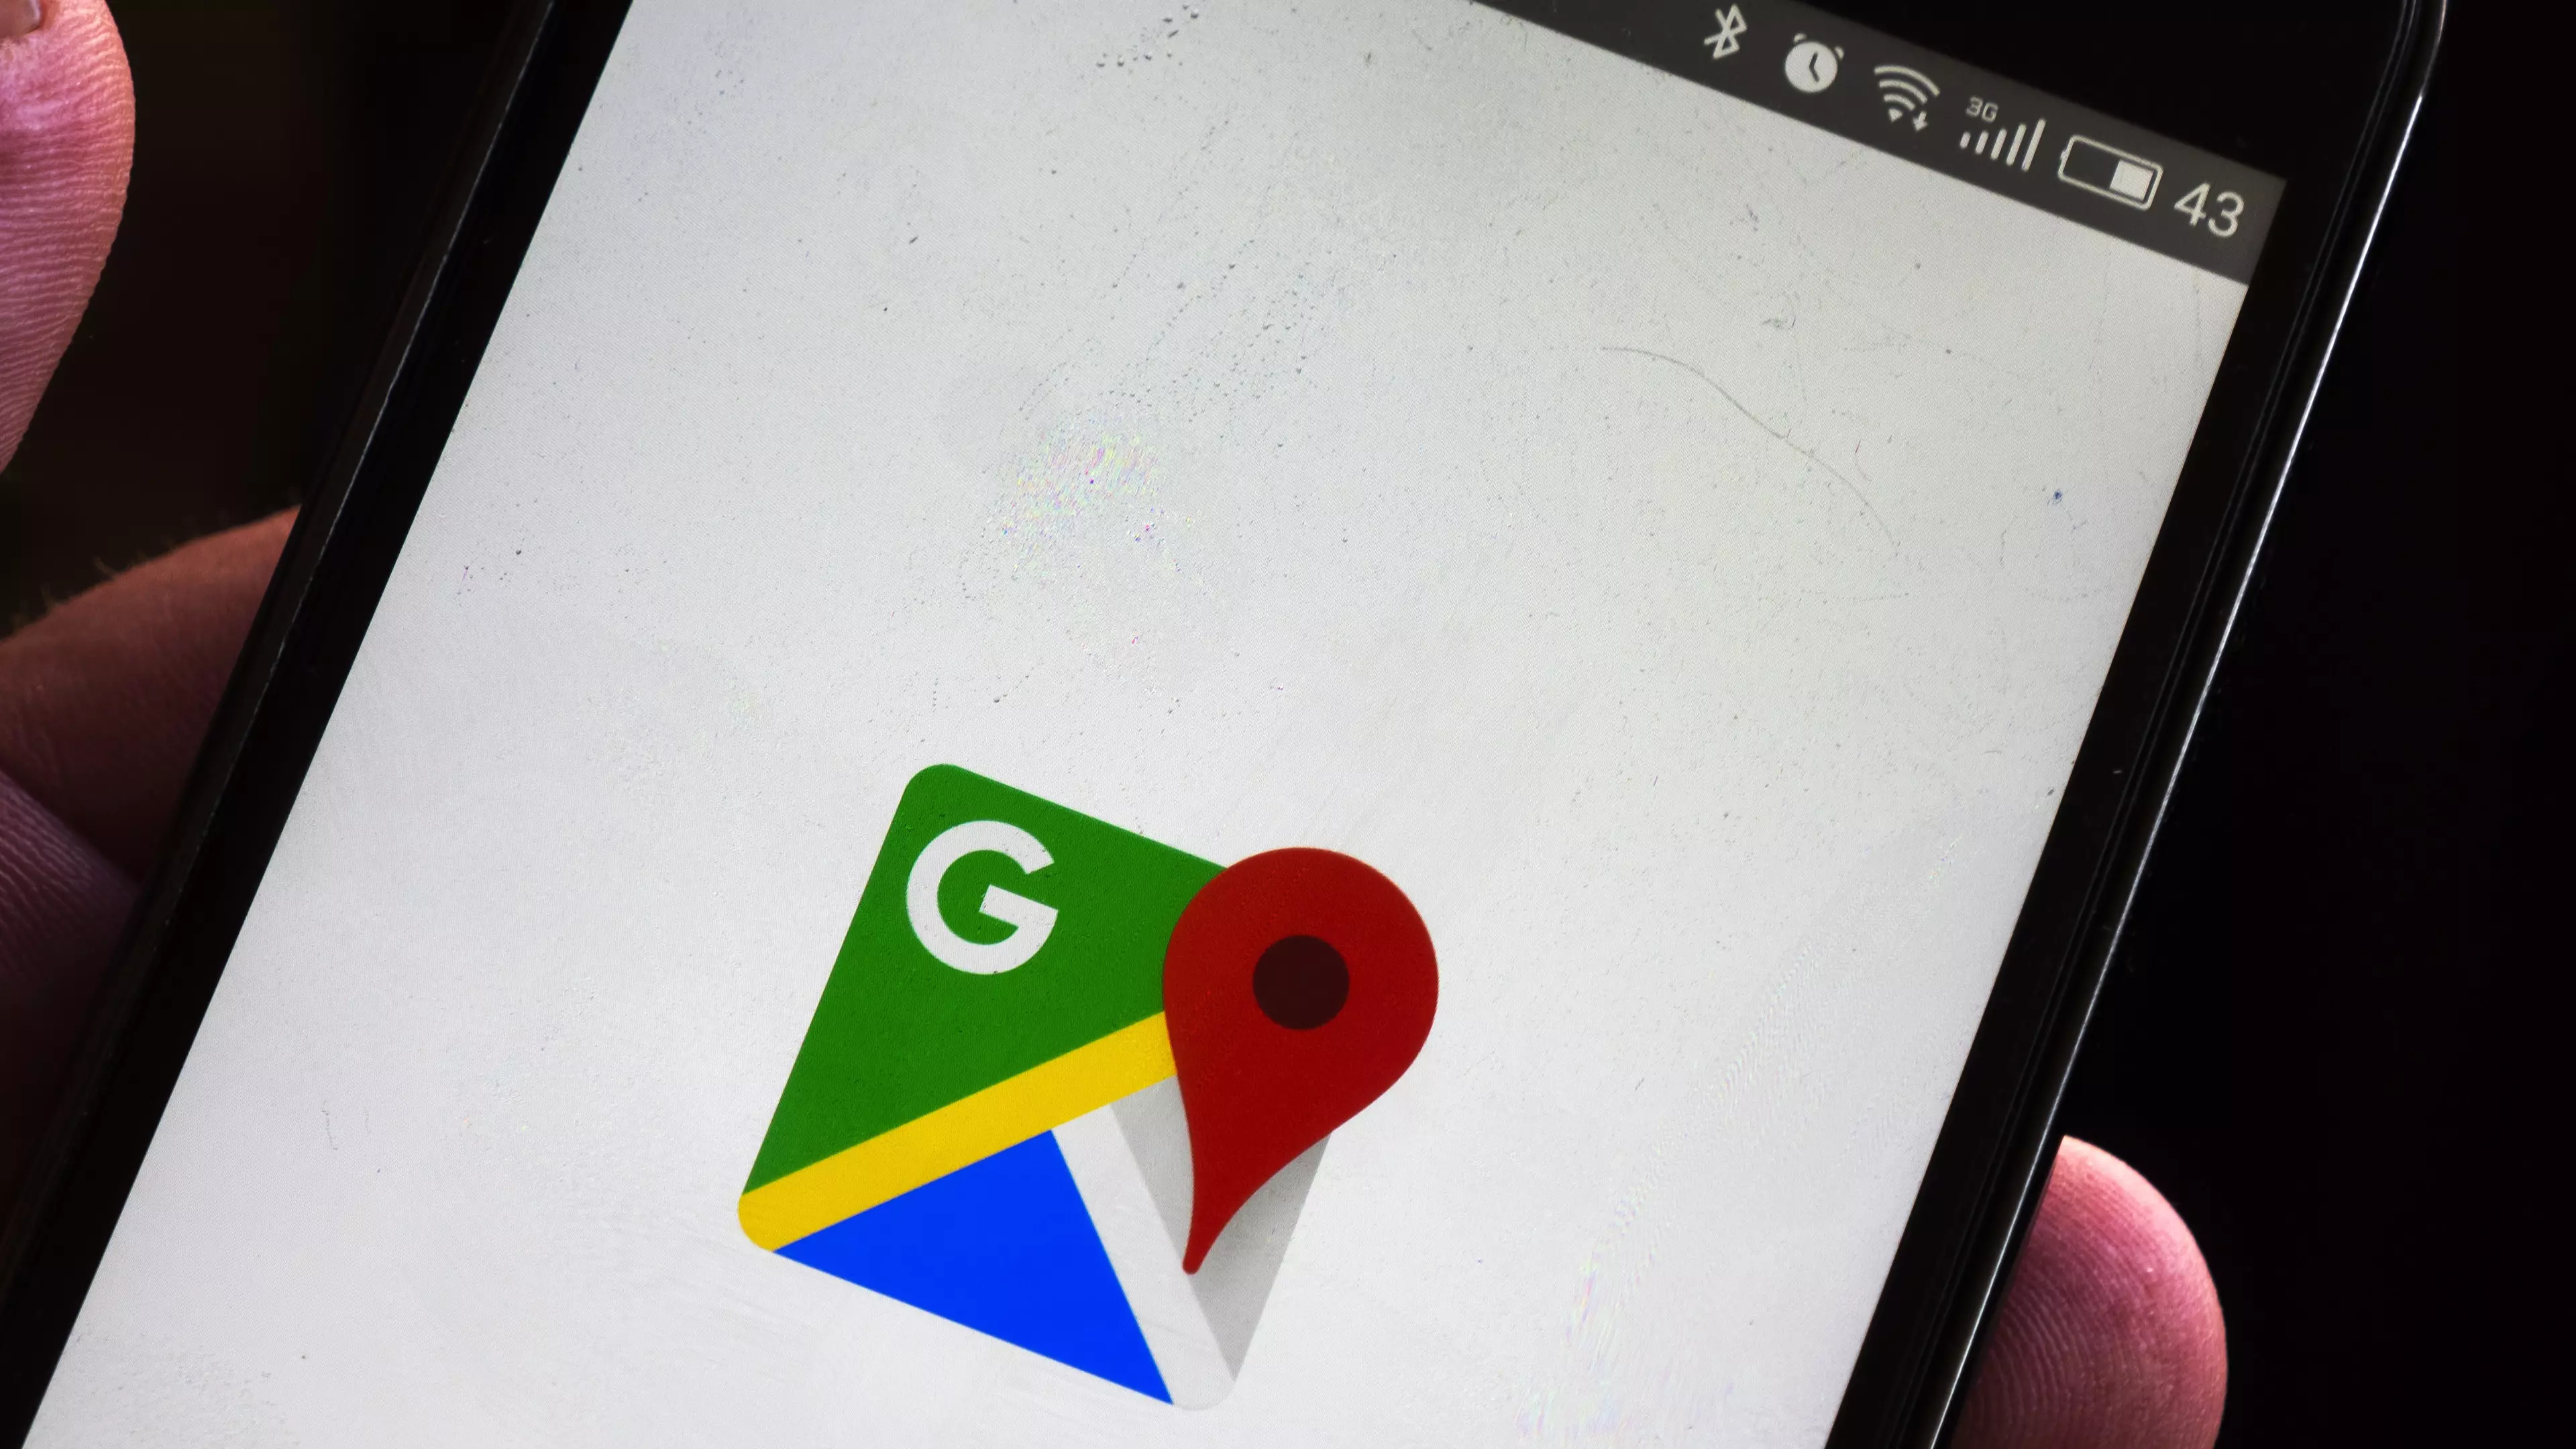 Man Exposes Himself On Street View, Google Maps Accidentally Only Blurs His Face